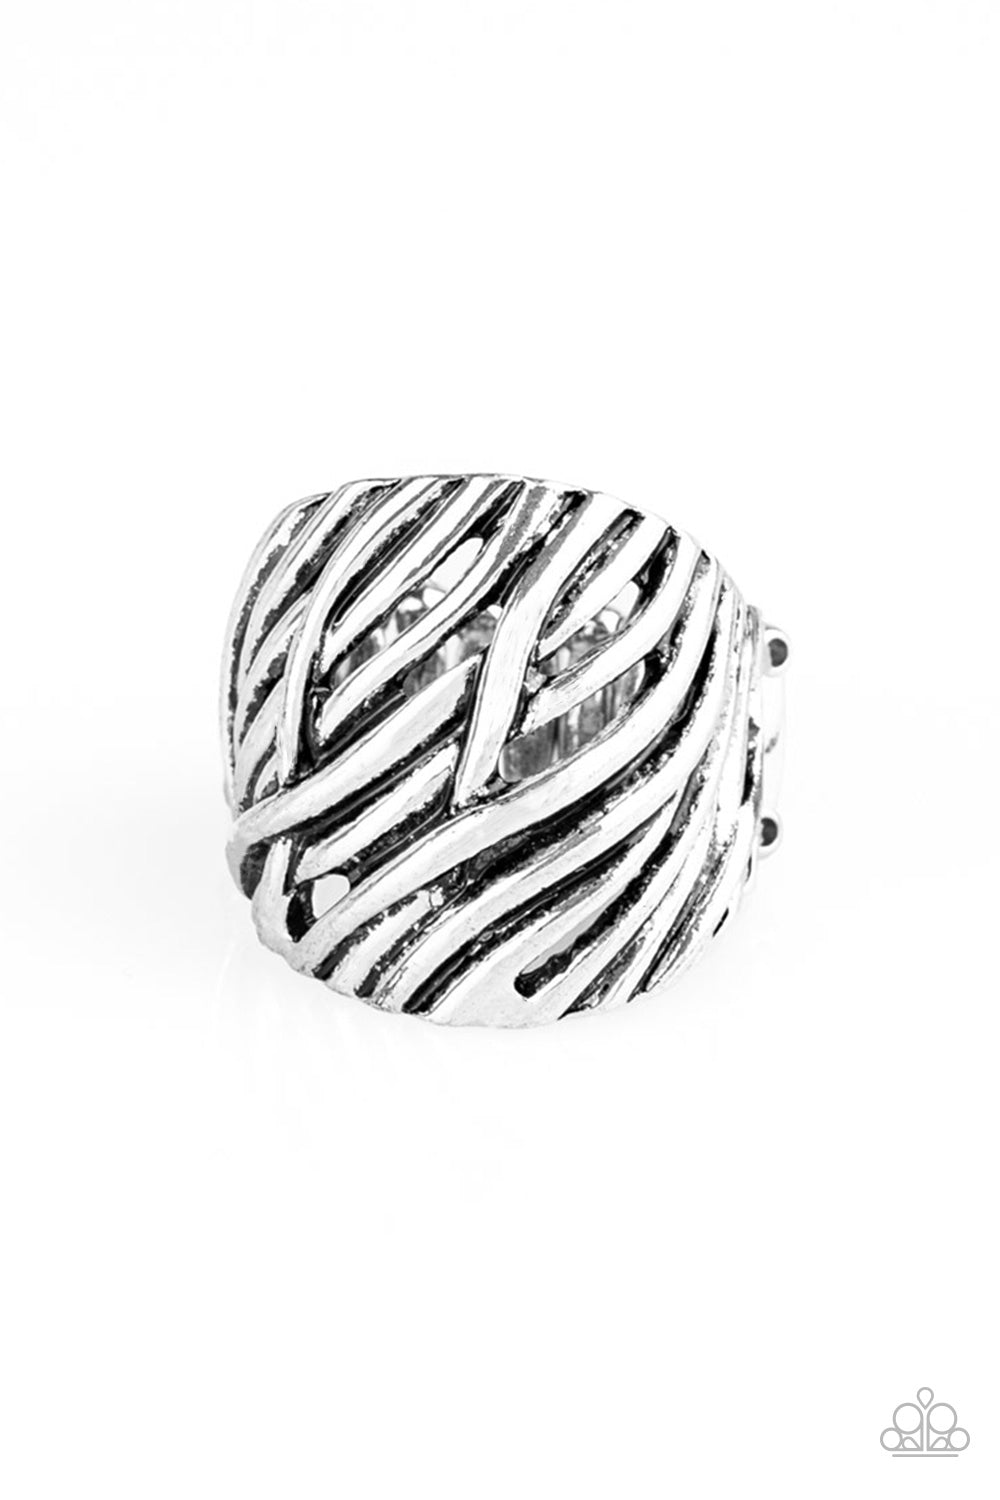 shop-sassy-affordable- really-riveting-silver-paparazzi-accessories